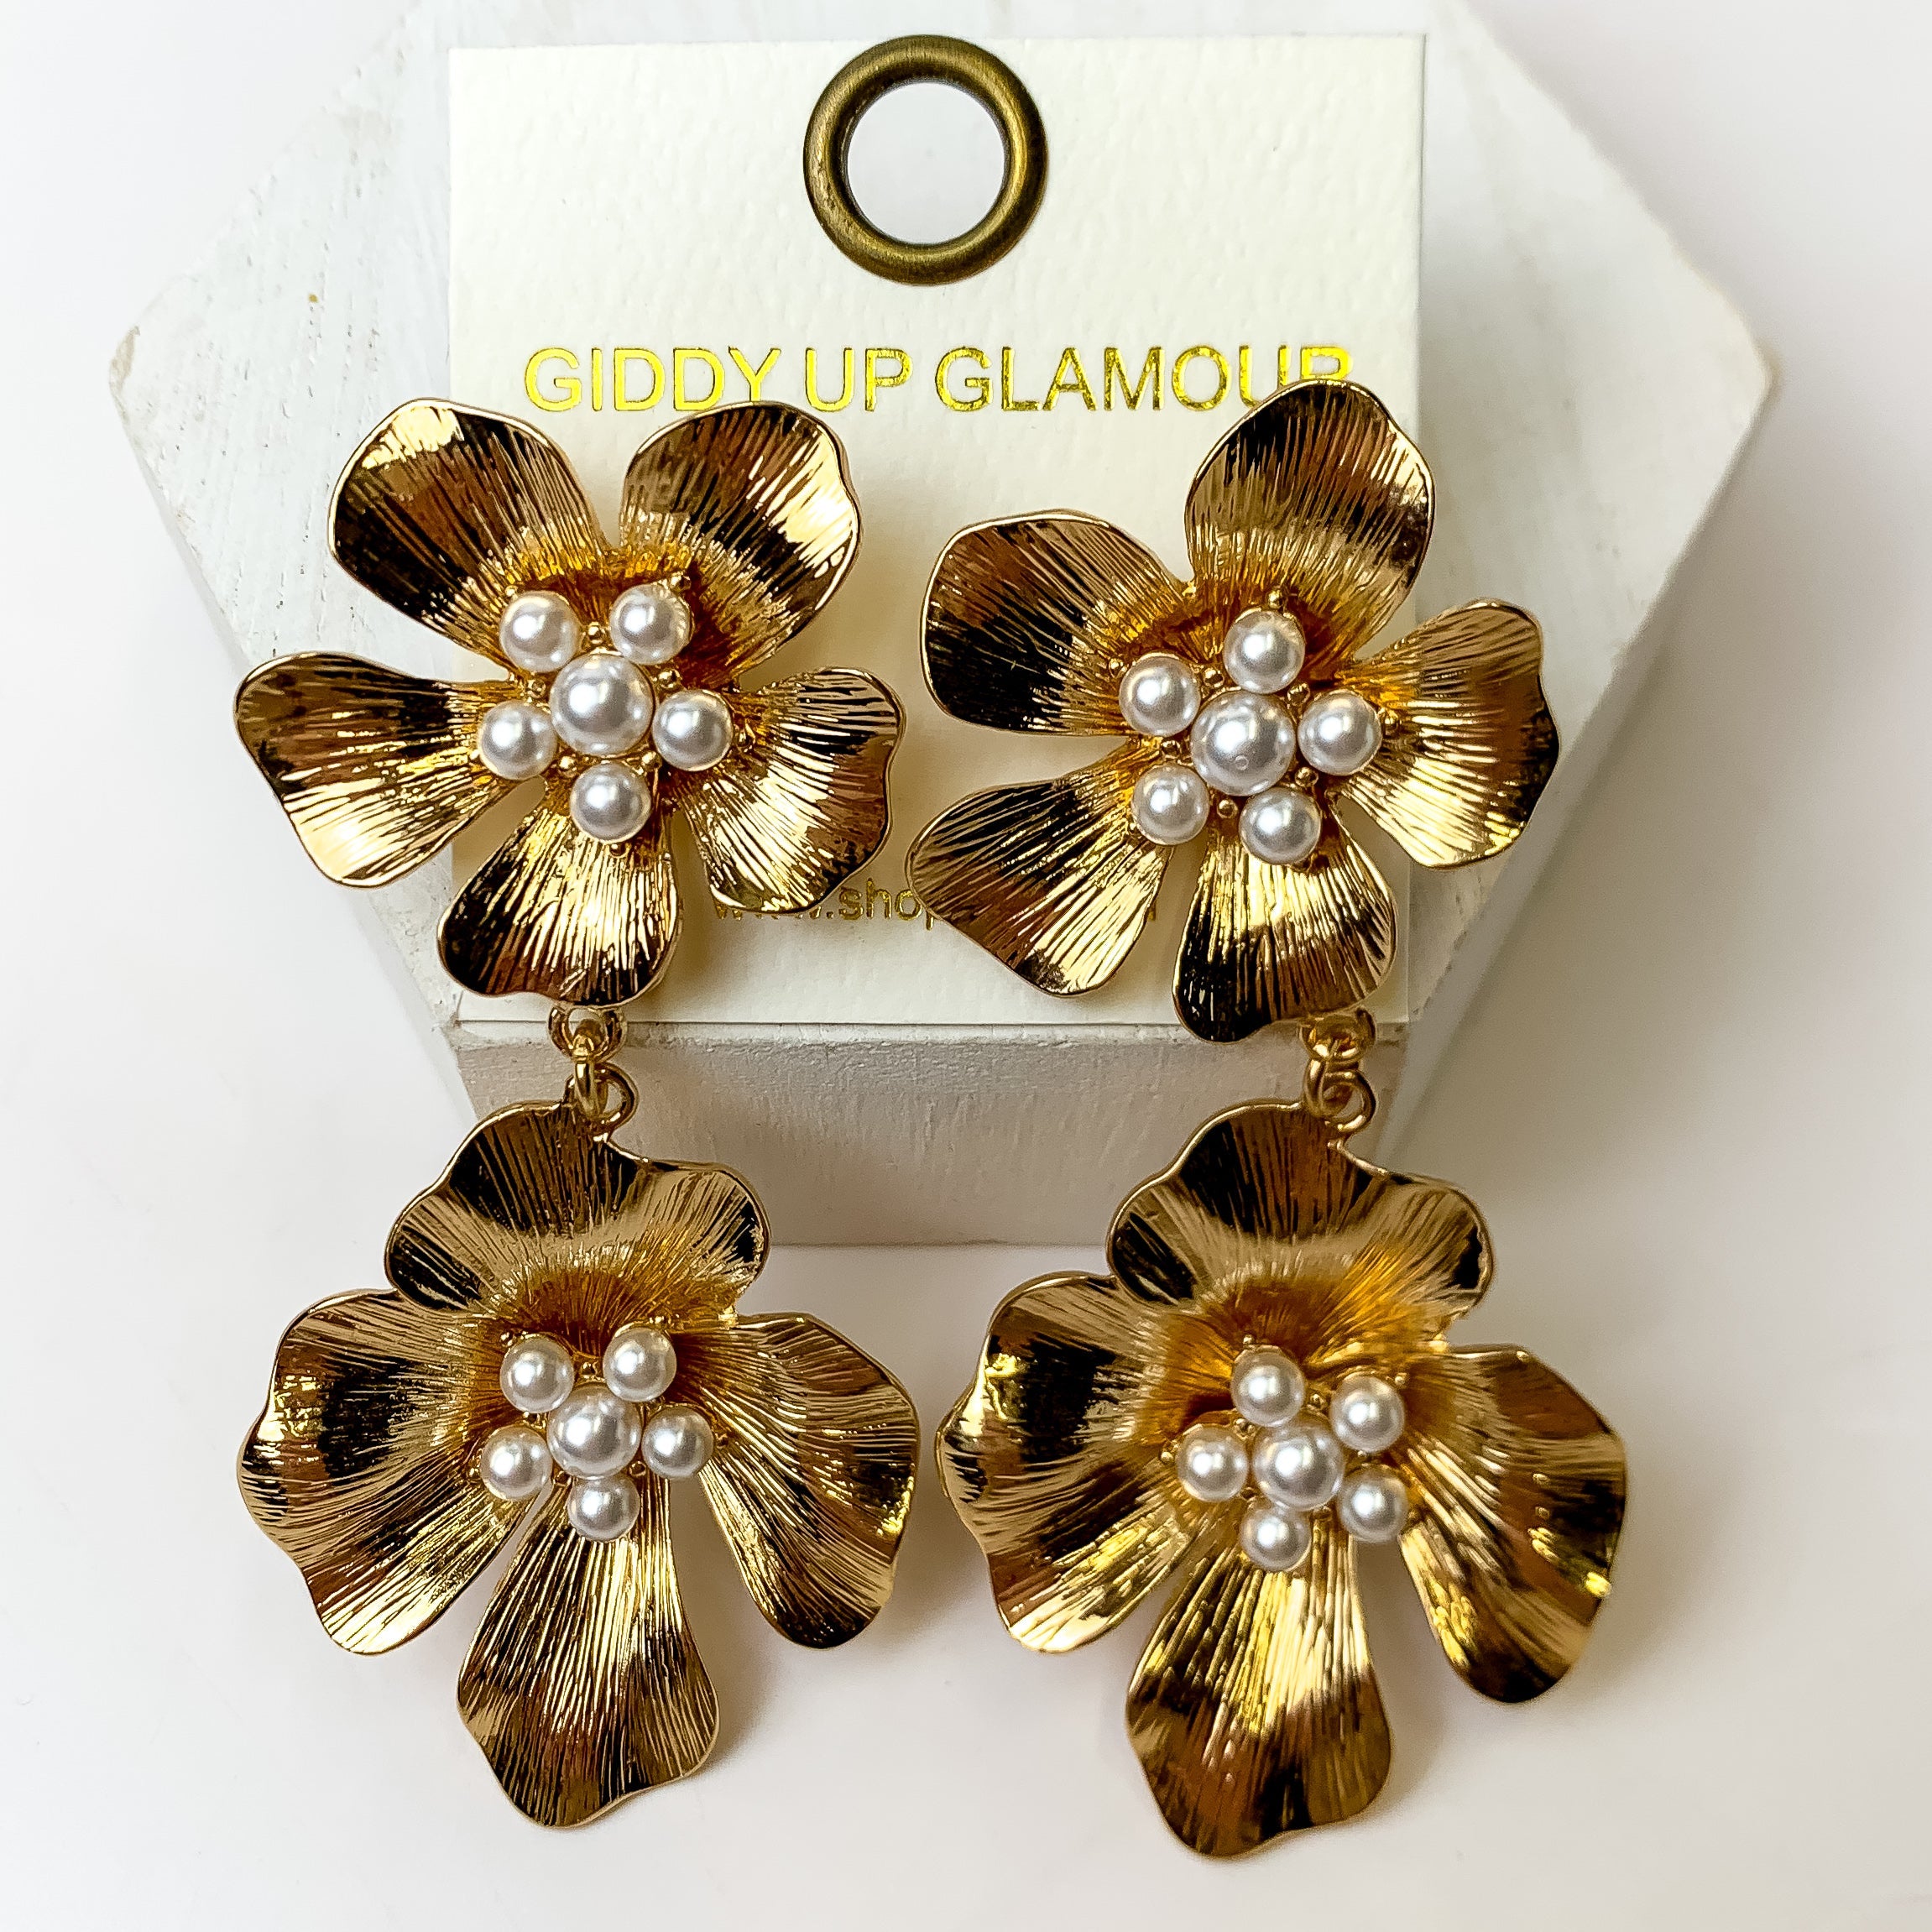 These Gold Tone Two Tiered Flower Earrings with a pearl center are placed on an ivory earring card. They are pictured on a white hexagon for lengthening purposes with a white backbround.